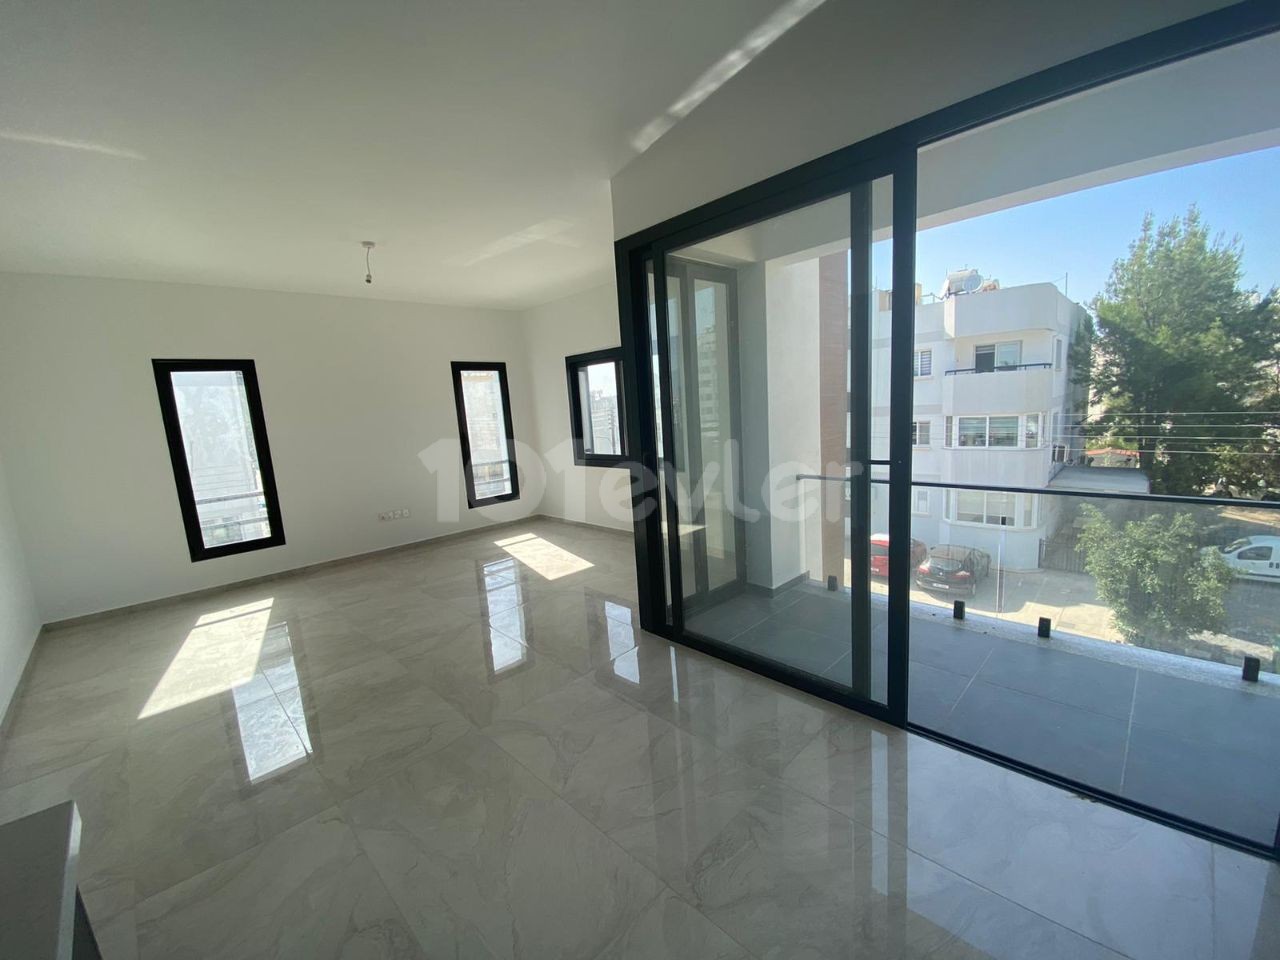 3+ 1 Apartment Of 128 m2 And 2+ 1 Penthouse Of 110+16 m2 Terrace For Sale In Ortakoy, Nicosia 78.000 STG ** 